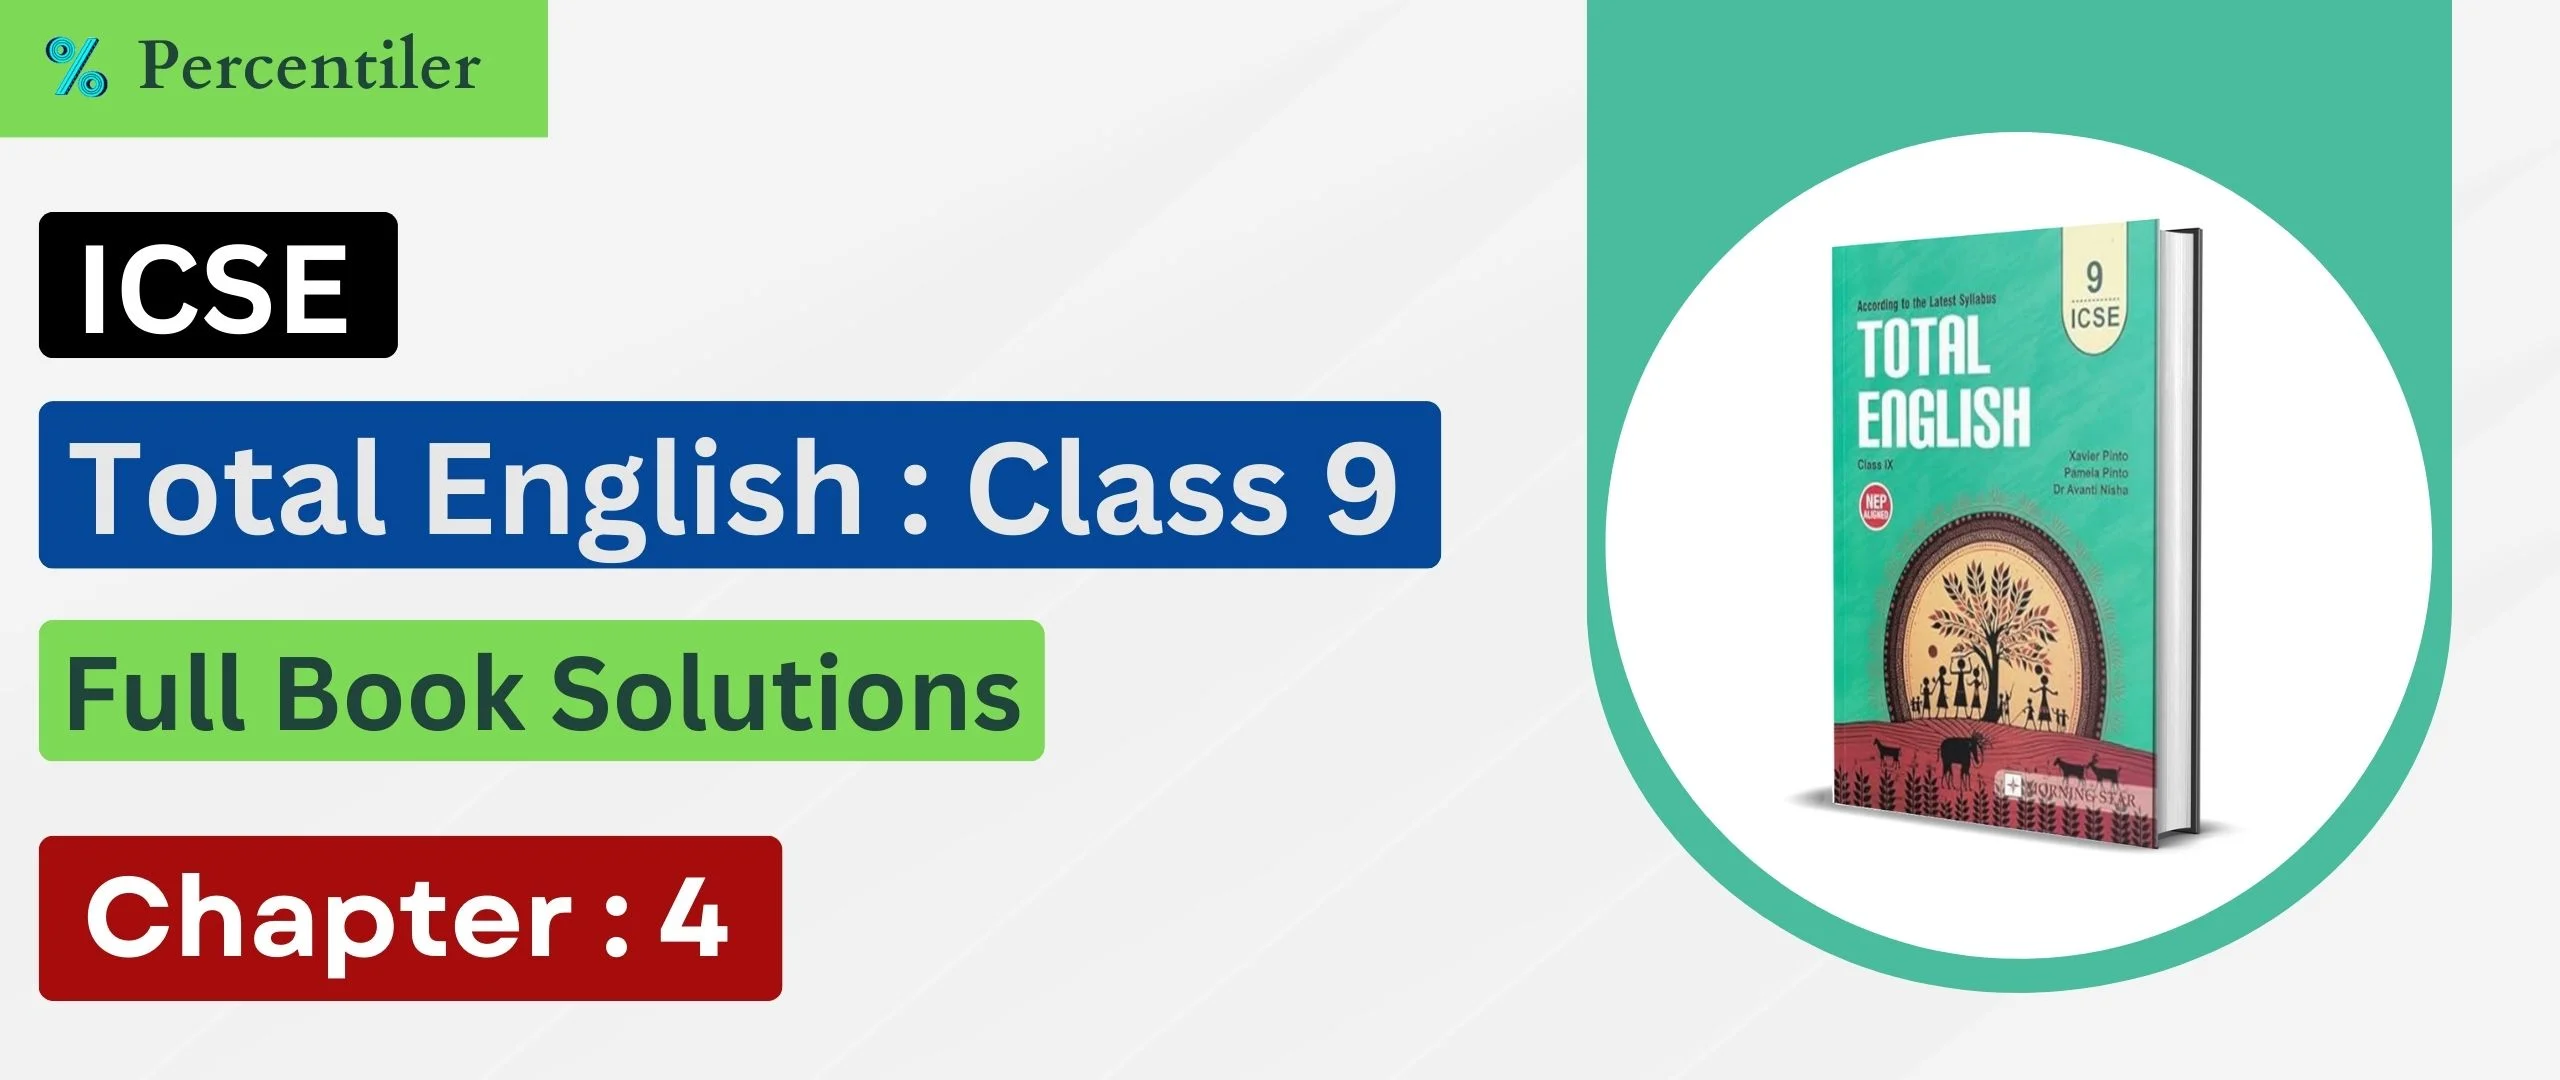 ICSE Total English Class 9 Solution : Chapter 4